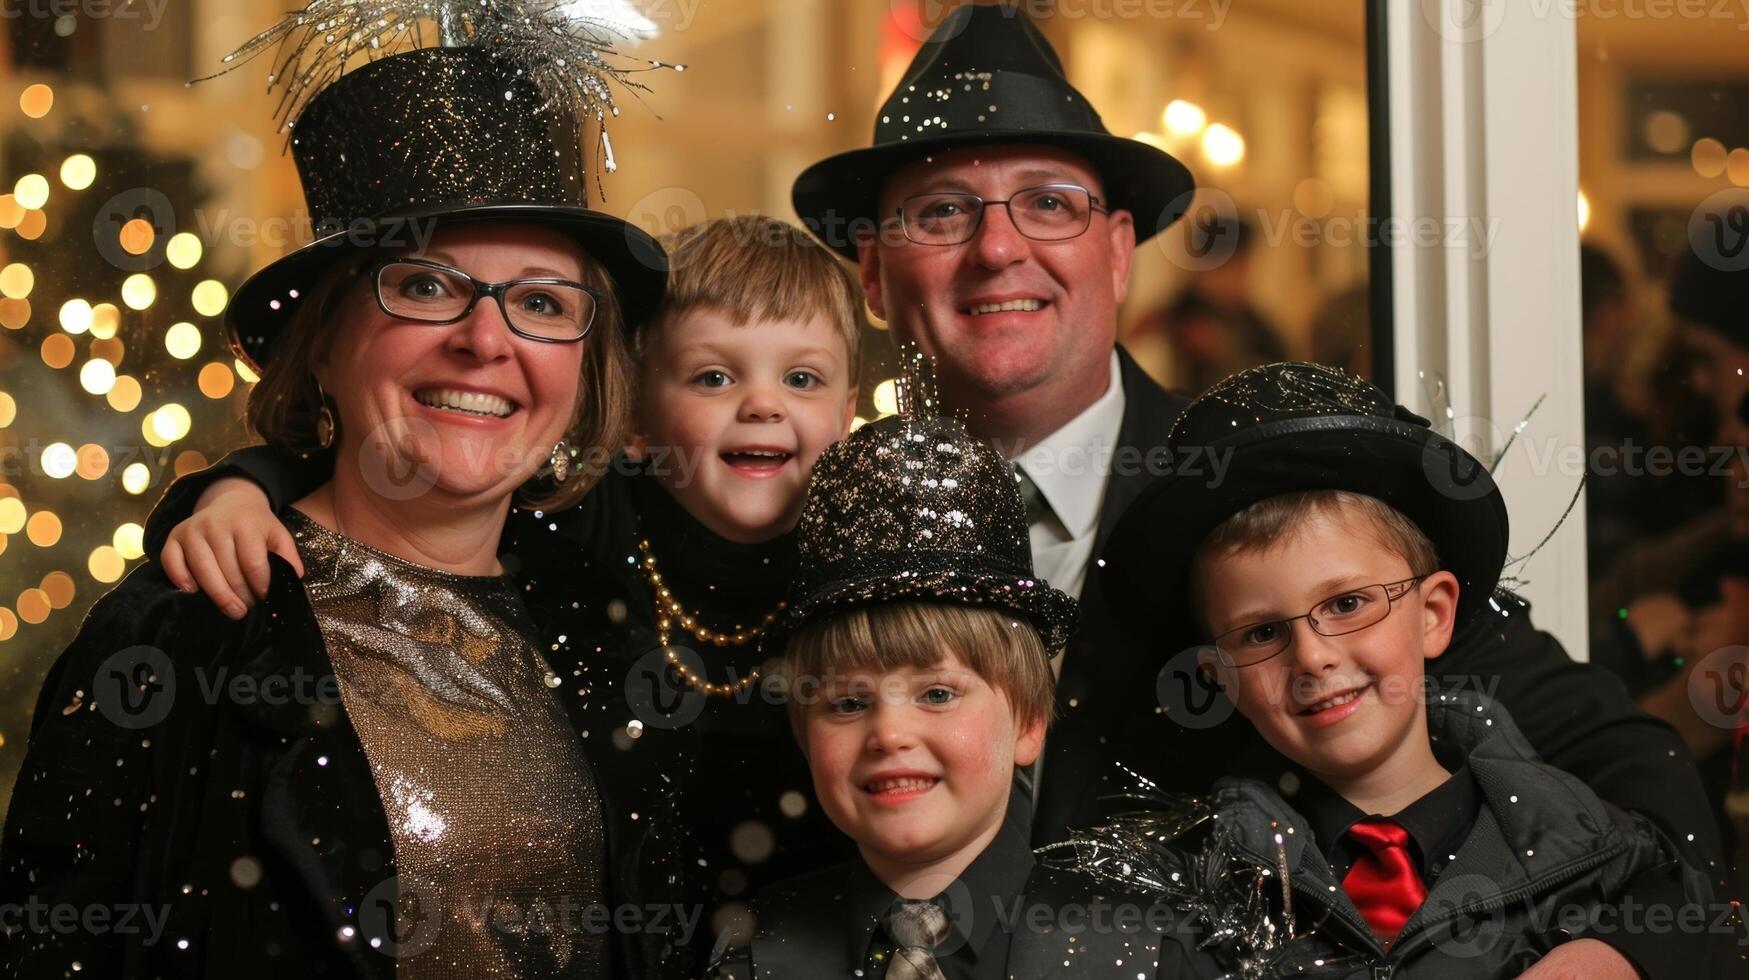 Parents and children dressed in their best sparkly attire ready to ring in the New Year with style photo